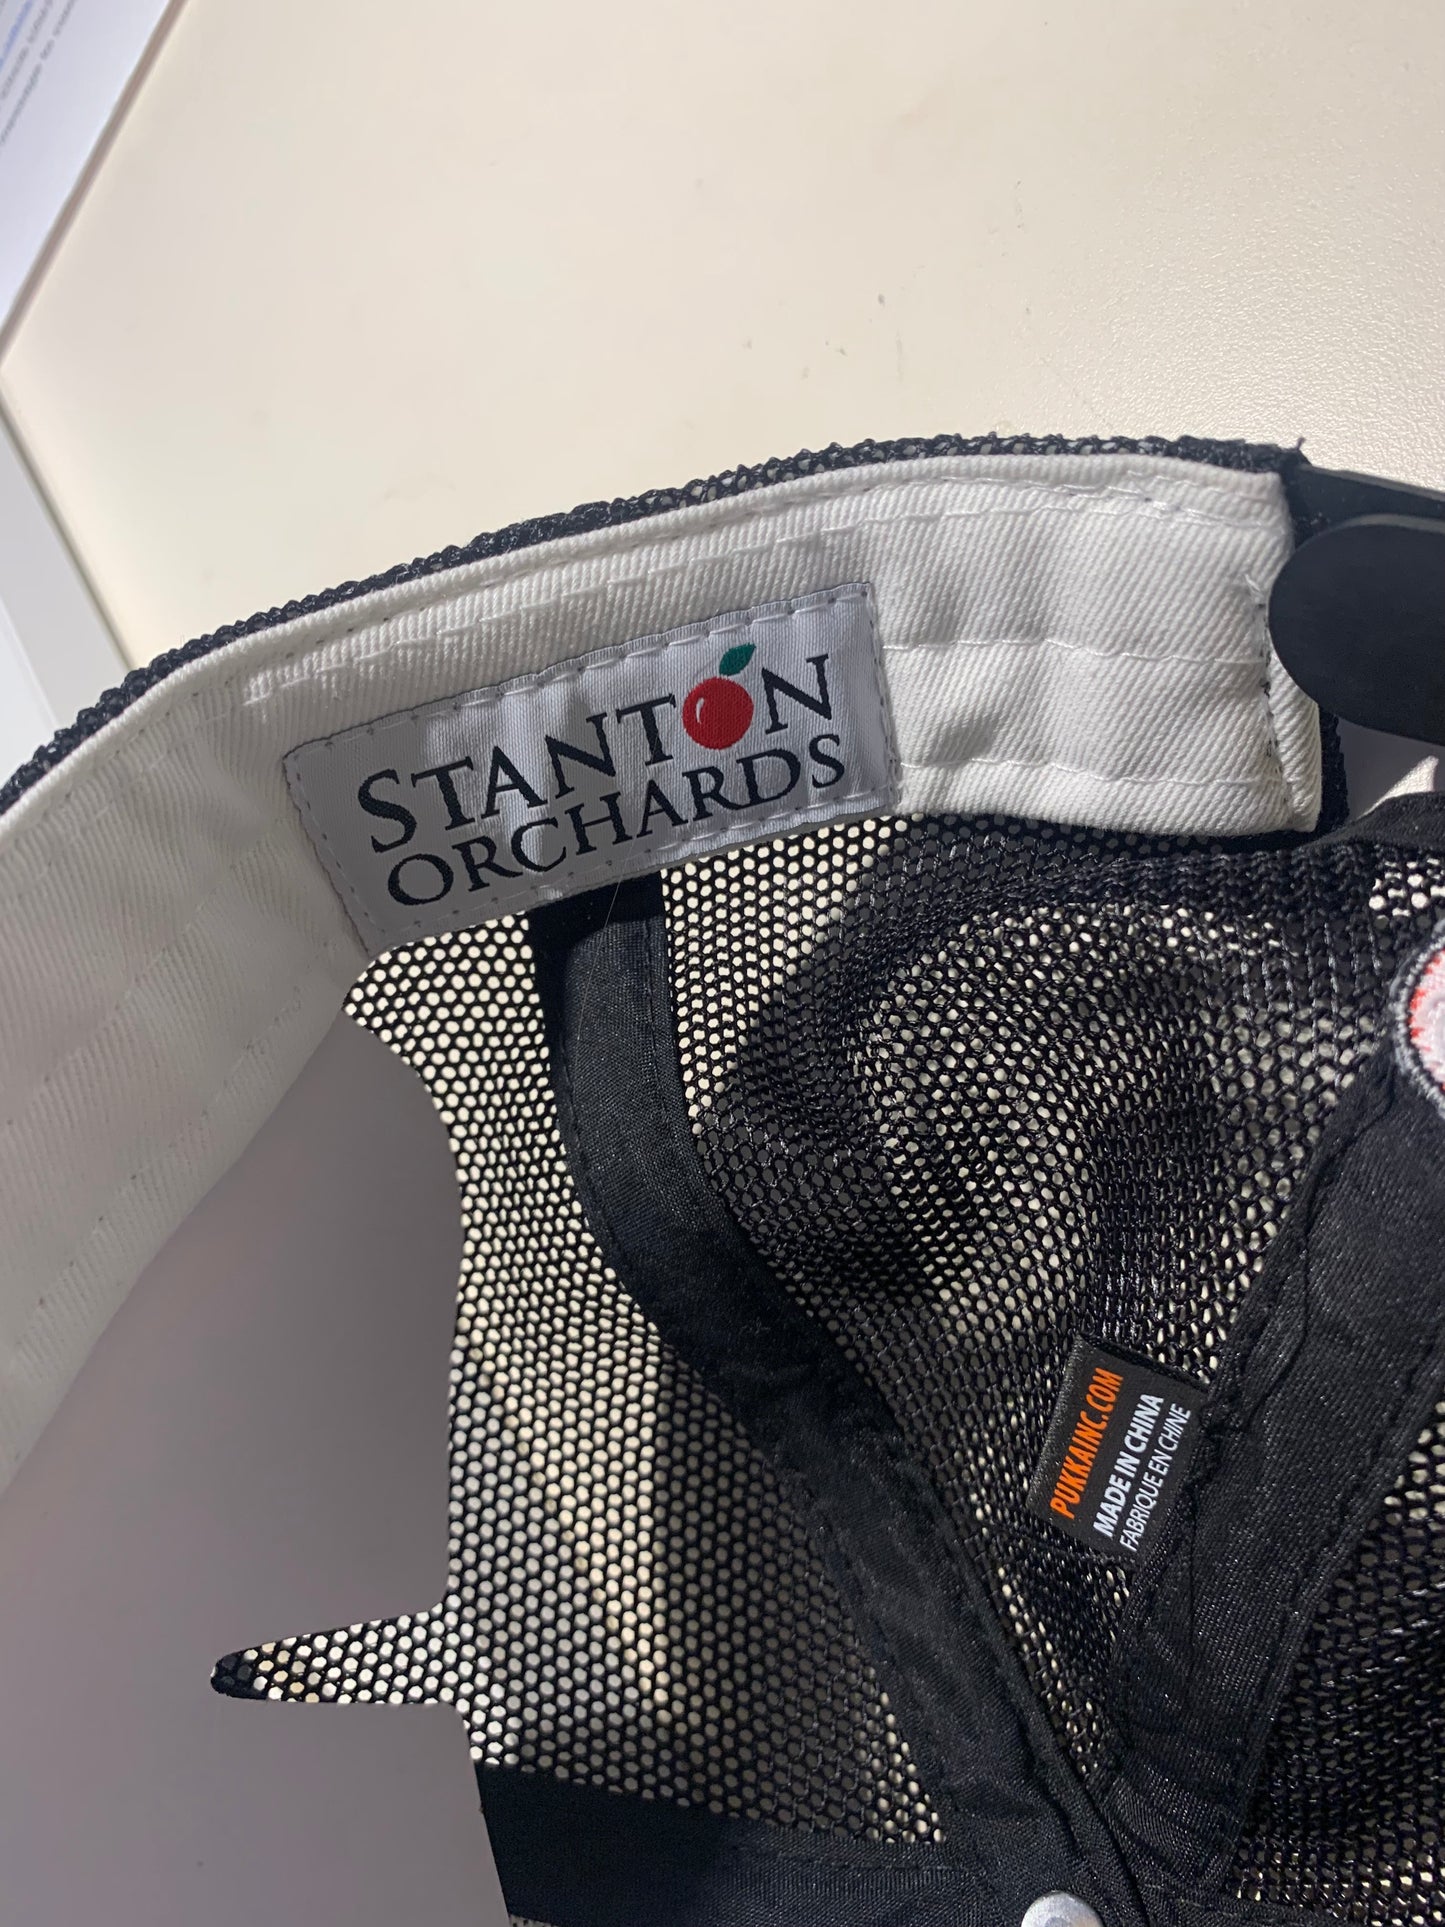 Big Fan Stanton Orchards Trucker Hat w/ 3 features / Custom Order Only